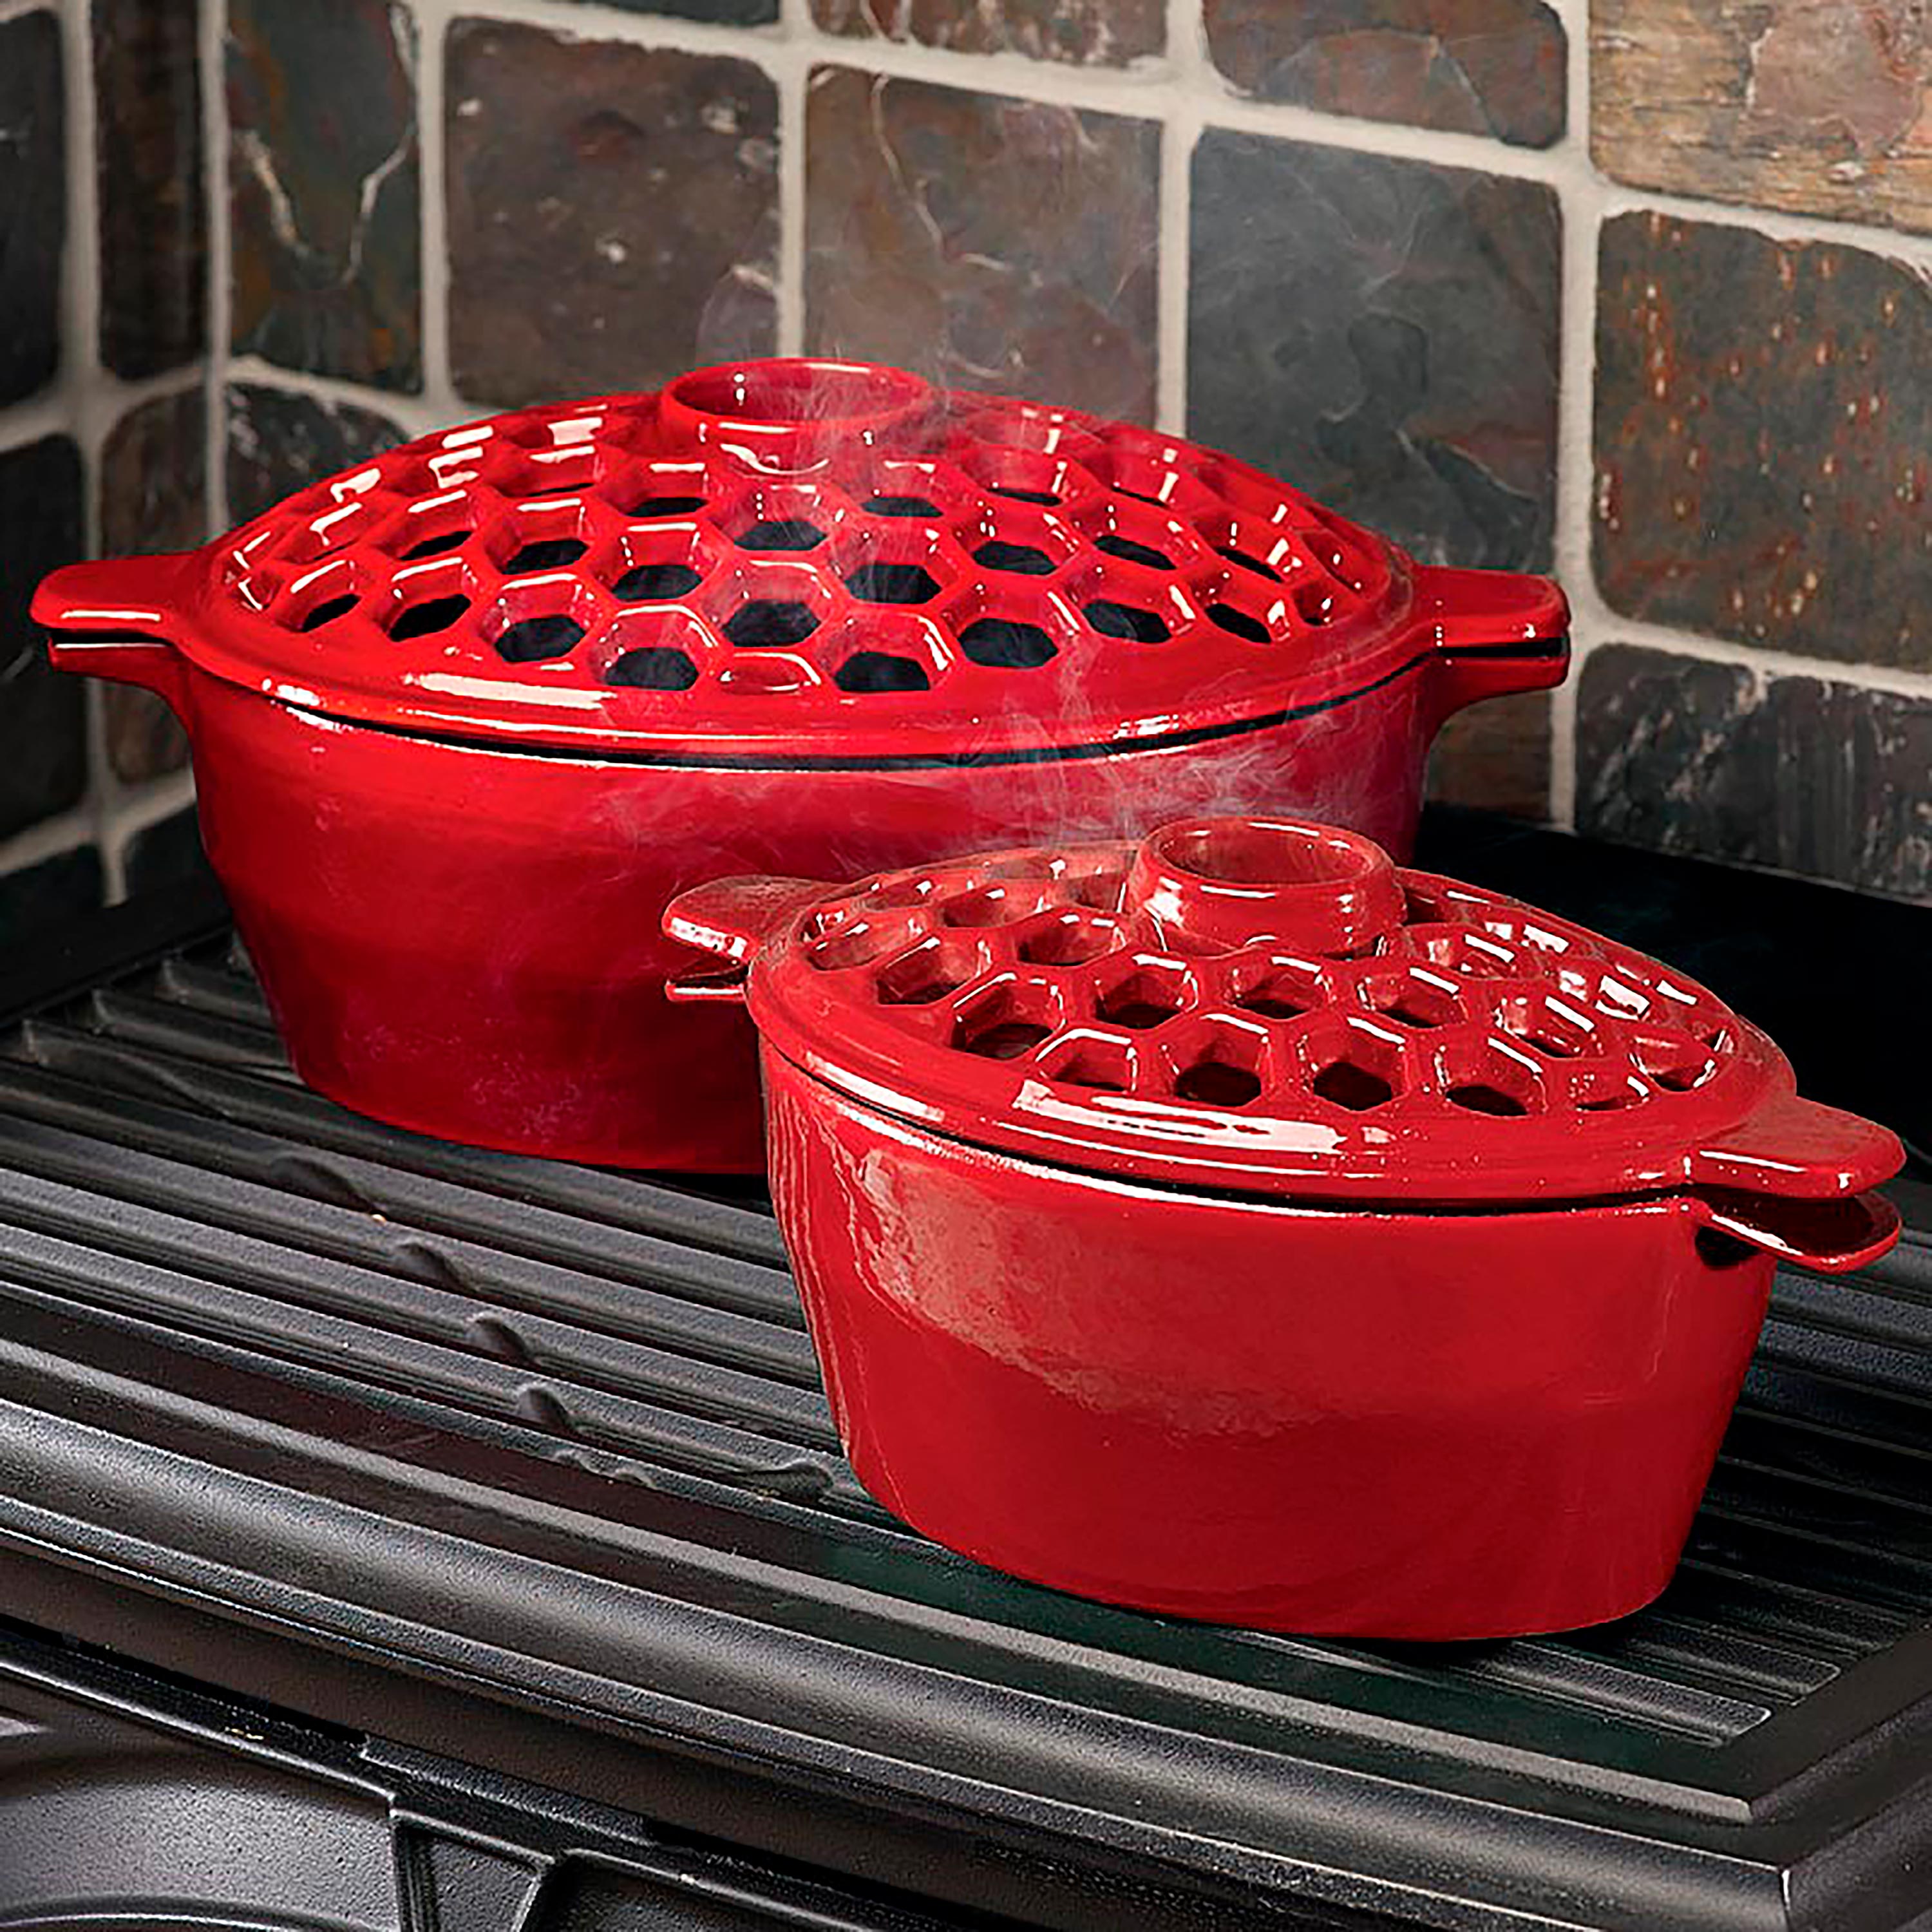 Cast Iron Lattice Steamers And Trivets | Plow & Hearth